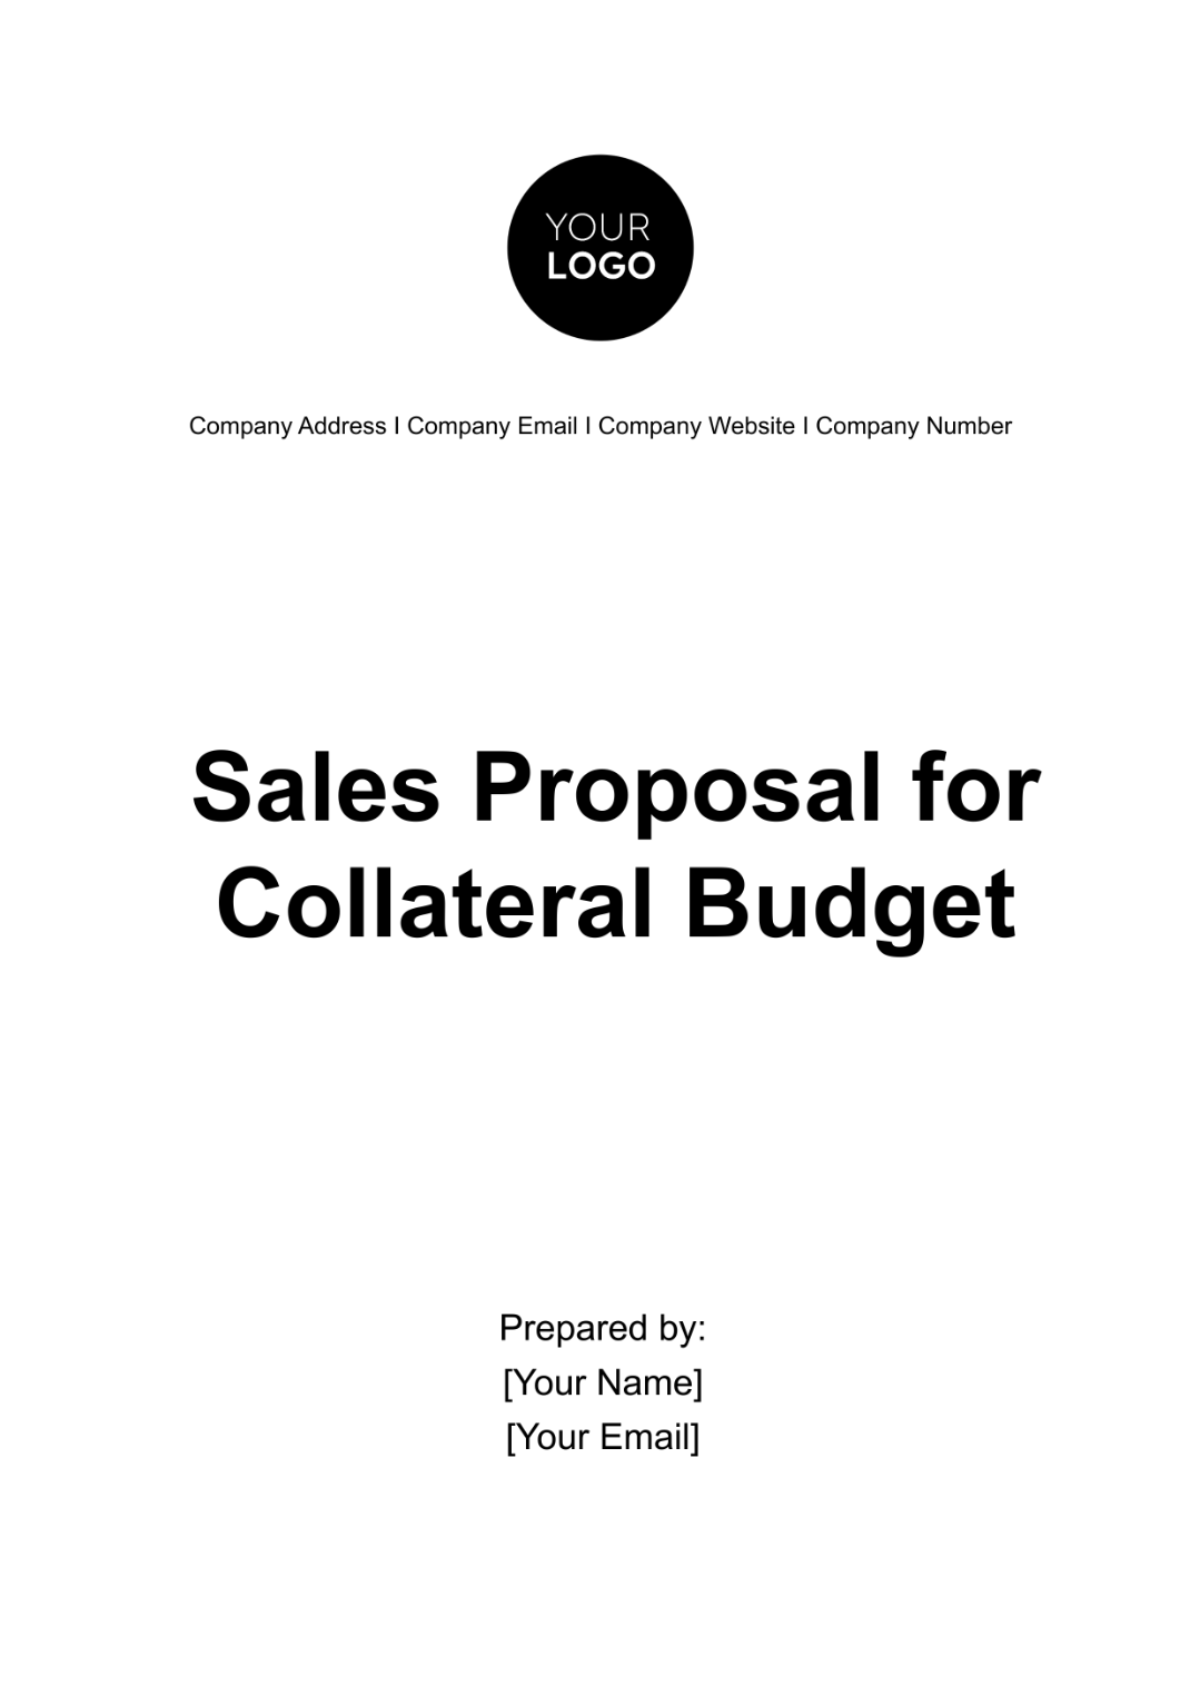 Sales Proposal for Collateral Budget Template